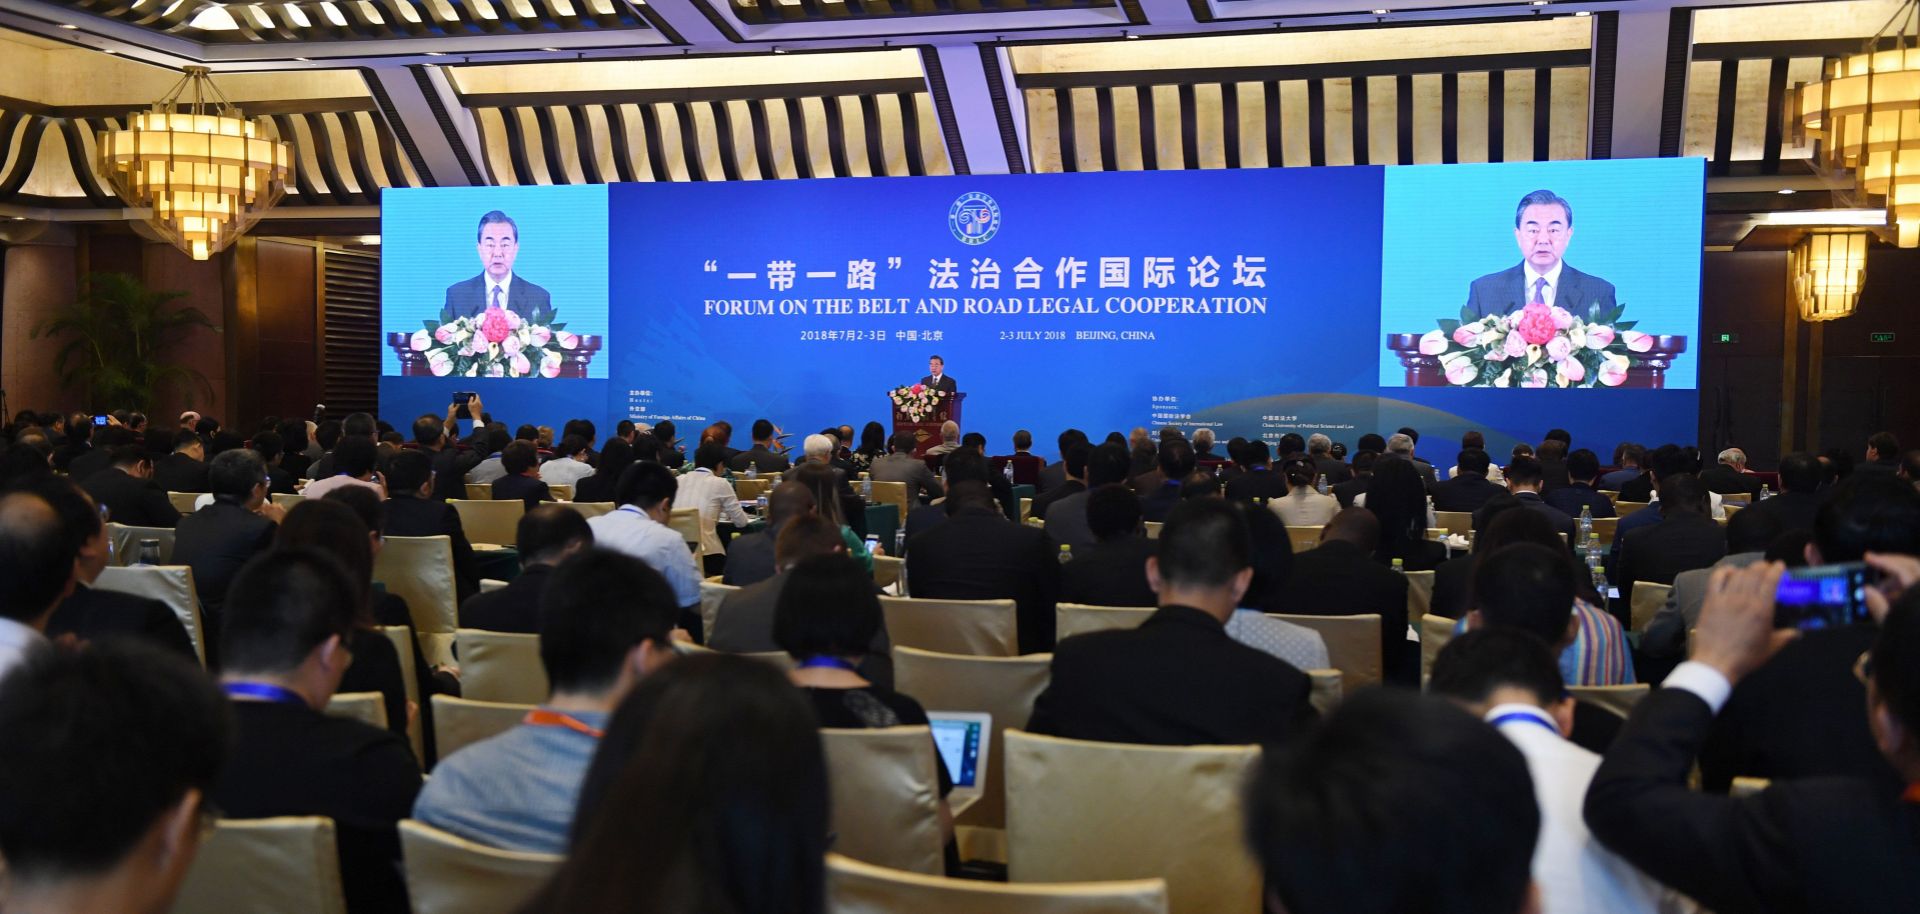 Chinese Foreign Minister Wang Yi speaks during the opening session of the Belt and Road Forum on Legal Cooperation at the Diaoyutai State Guesthouse in Beijing on July 2, 2018. 